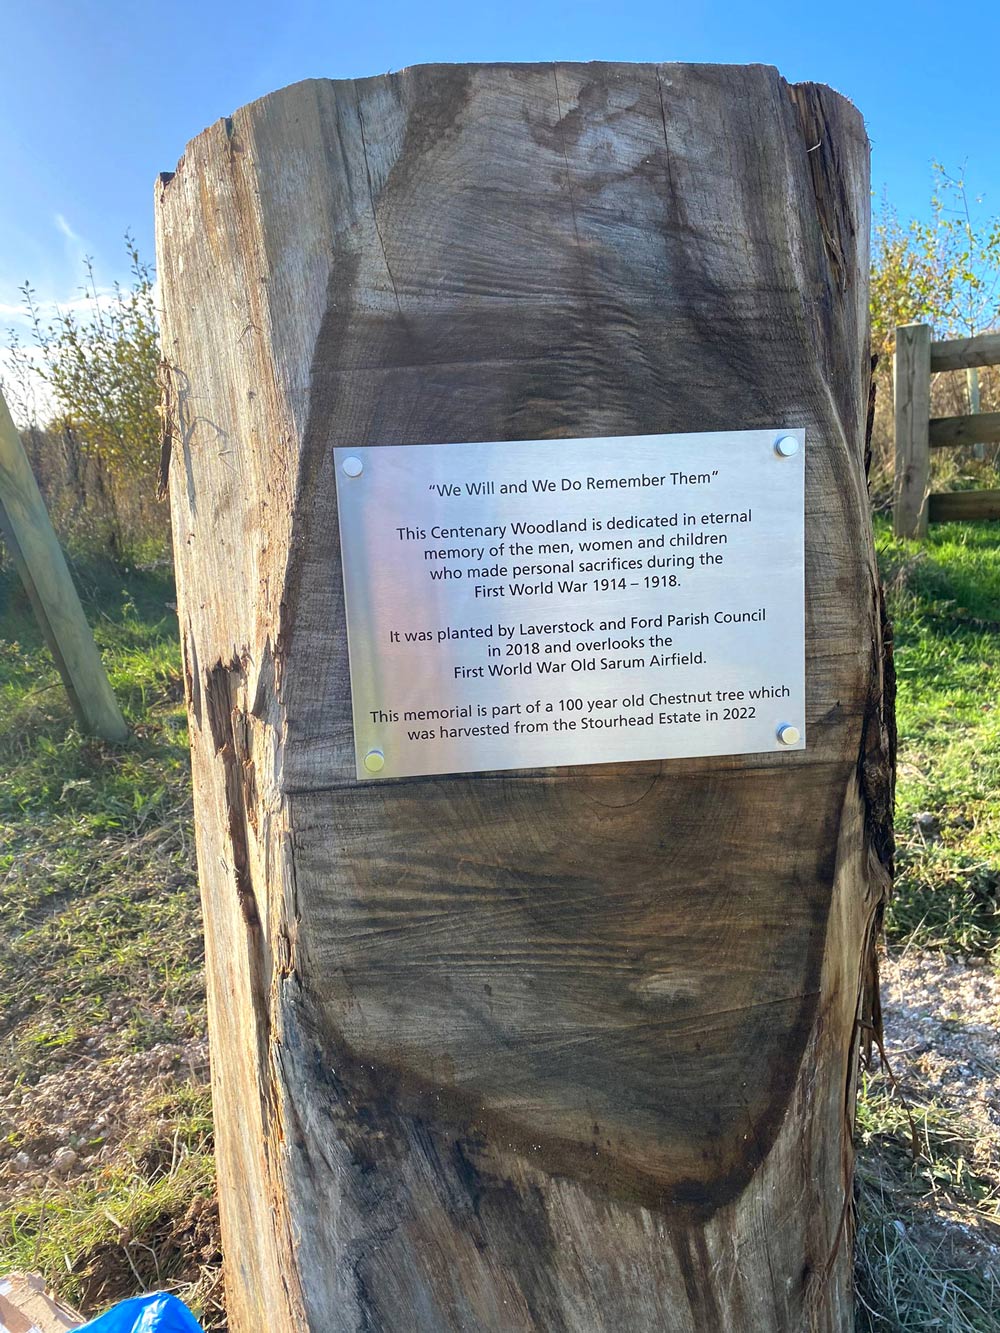 A 100-year-old chestnut ‘monolith’ was sourced from Stourhead Estates on which the memorial has been installed Credit: Laverstock & Ford Parish Council